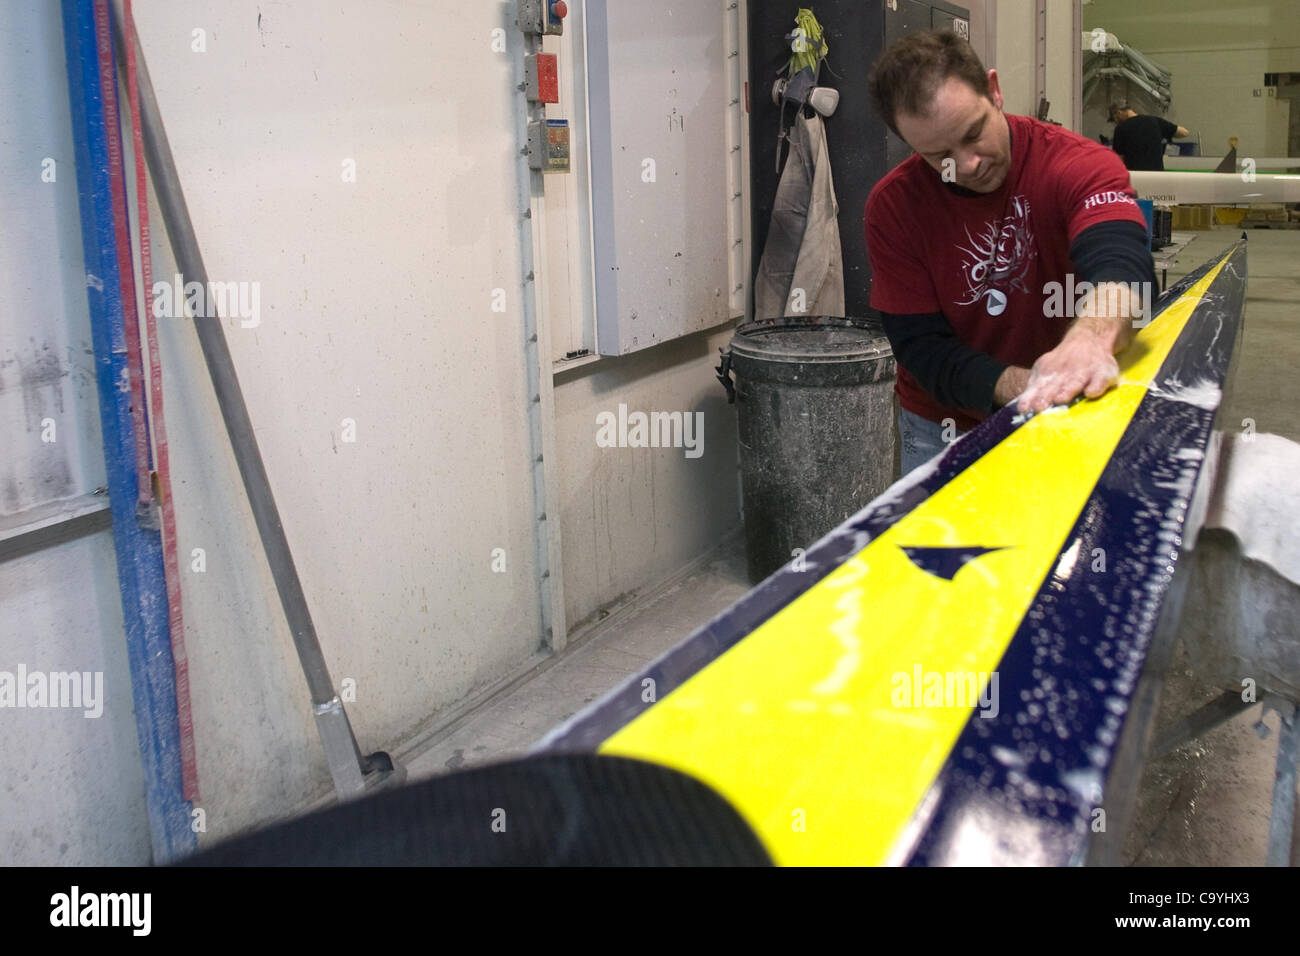 London Ontario, Canada - March 5, 2012. Steve Mann wet sands a shell that is painted in University of Michigan colours. Hudson Boat Works has been building high performance racing shells since 1981. Located in London Ontario, Canada the company supplies boats to National and Olympic teams around the Stock Photo